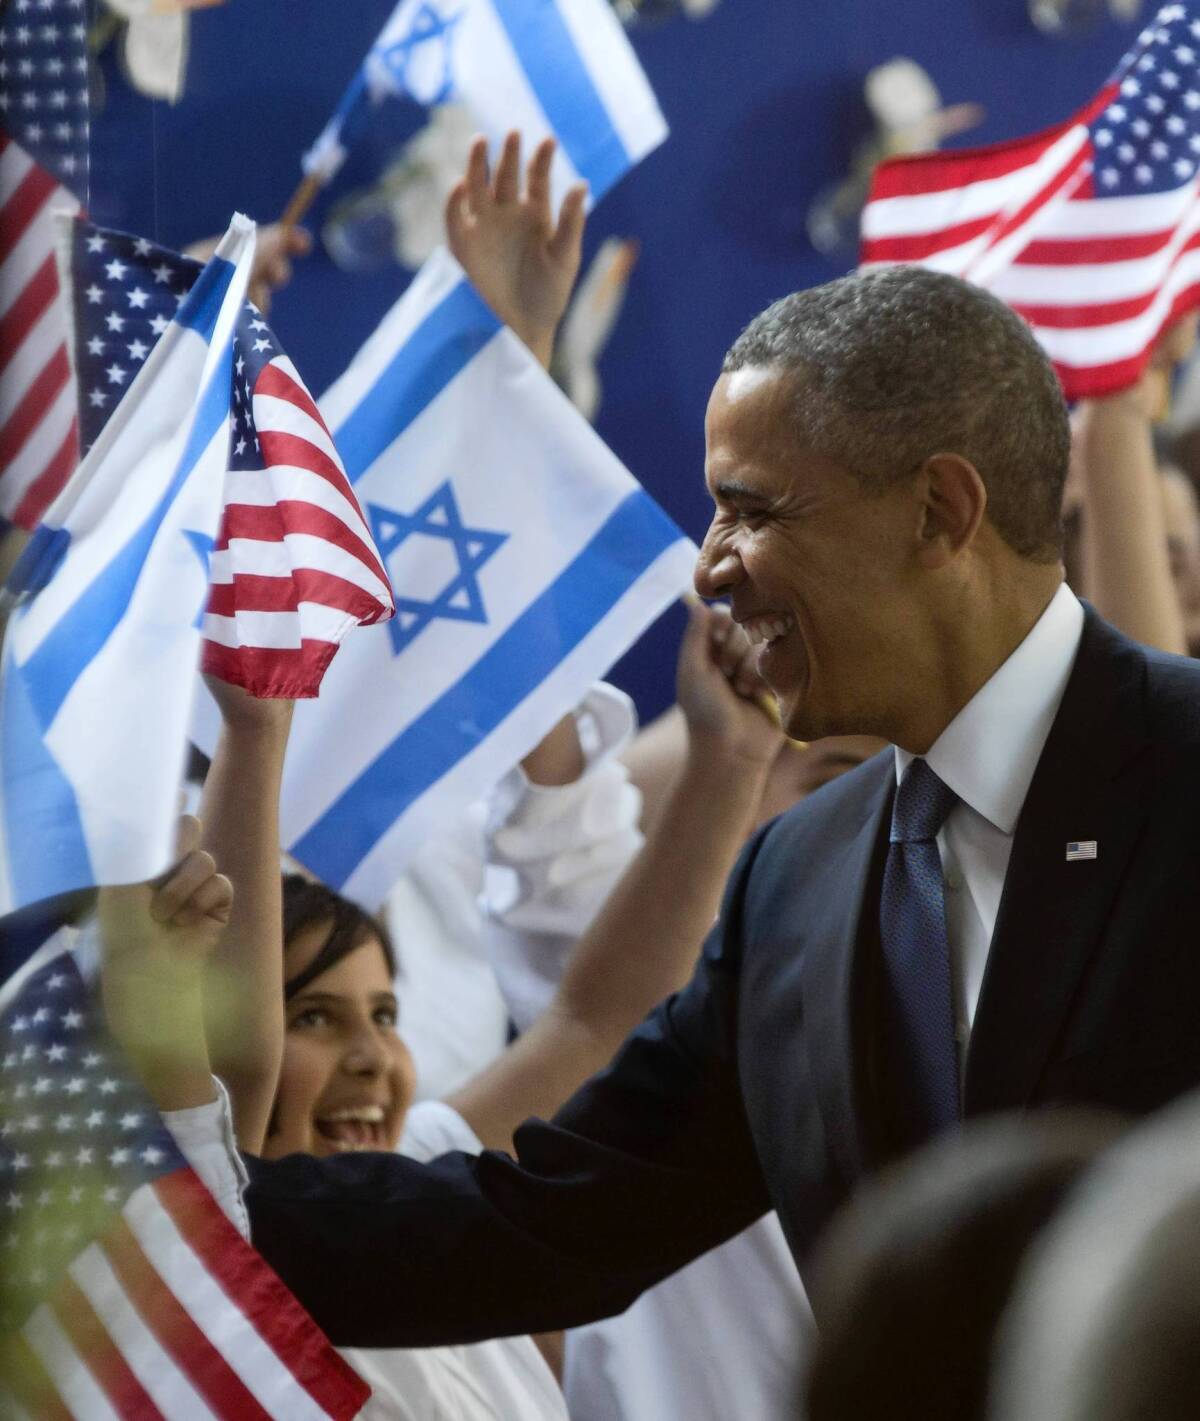 President Obama receives a welcome at the residence of Israeli President Shimon Peres in Jerusalem.